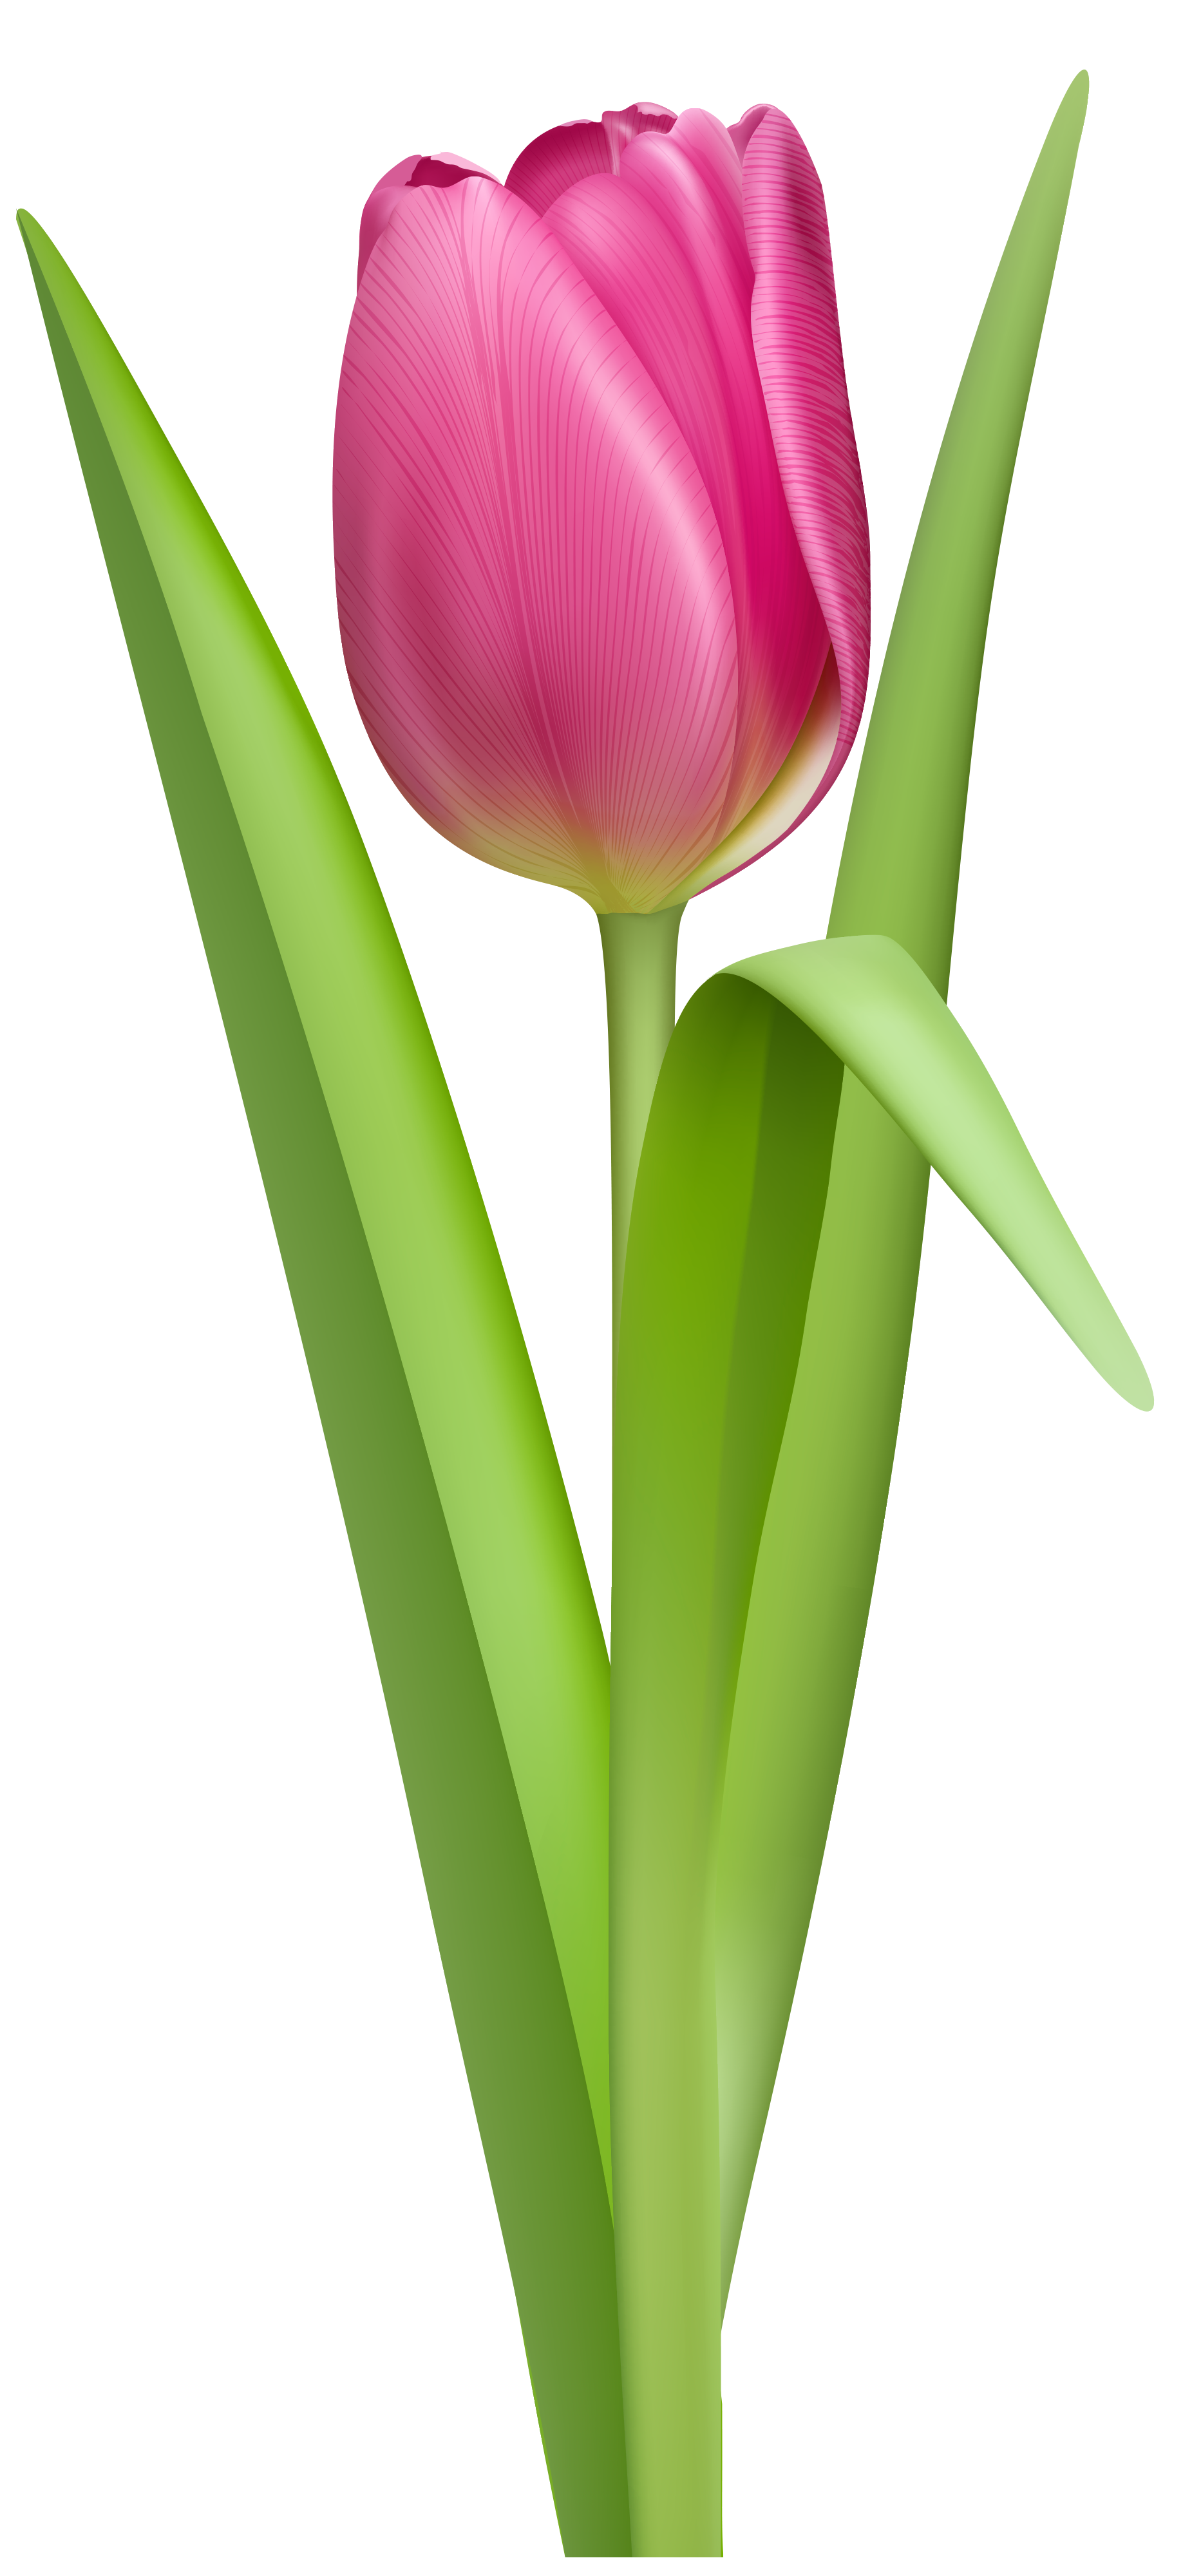 Clipart roses clear background. Tulip no flower cliparts